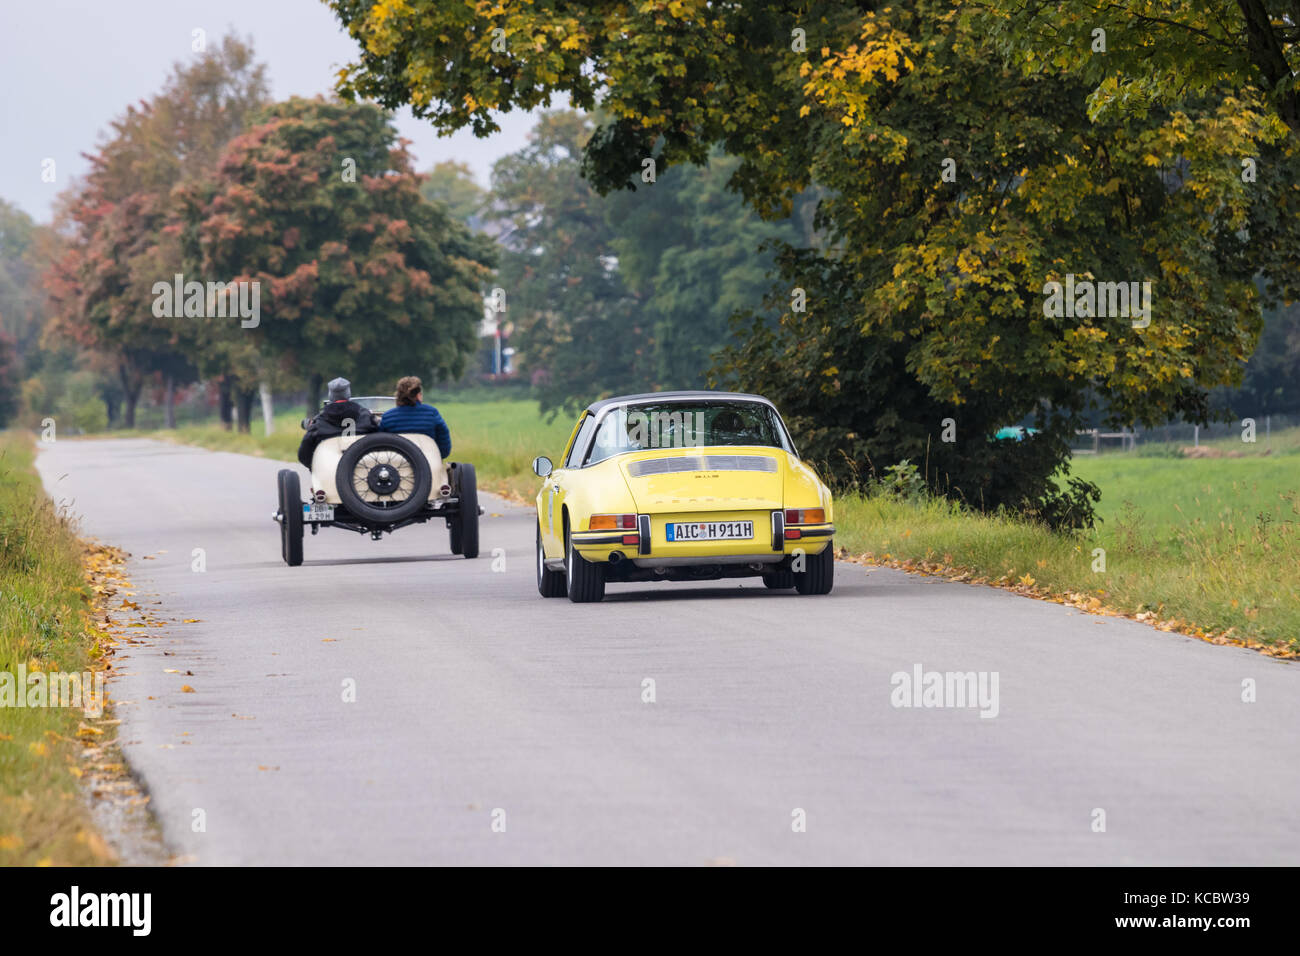 Augsburg, Germany - October 1, 2017: 1969 Porsche 911 S Targa and Ford oldtimer cars at the Fuggerstadt Classic 2017 Oldtimer Rallye on October 1, 201 Stock Photo